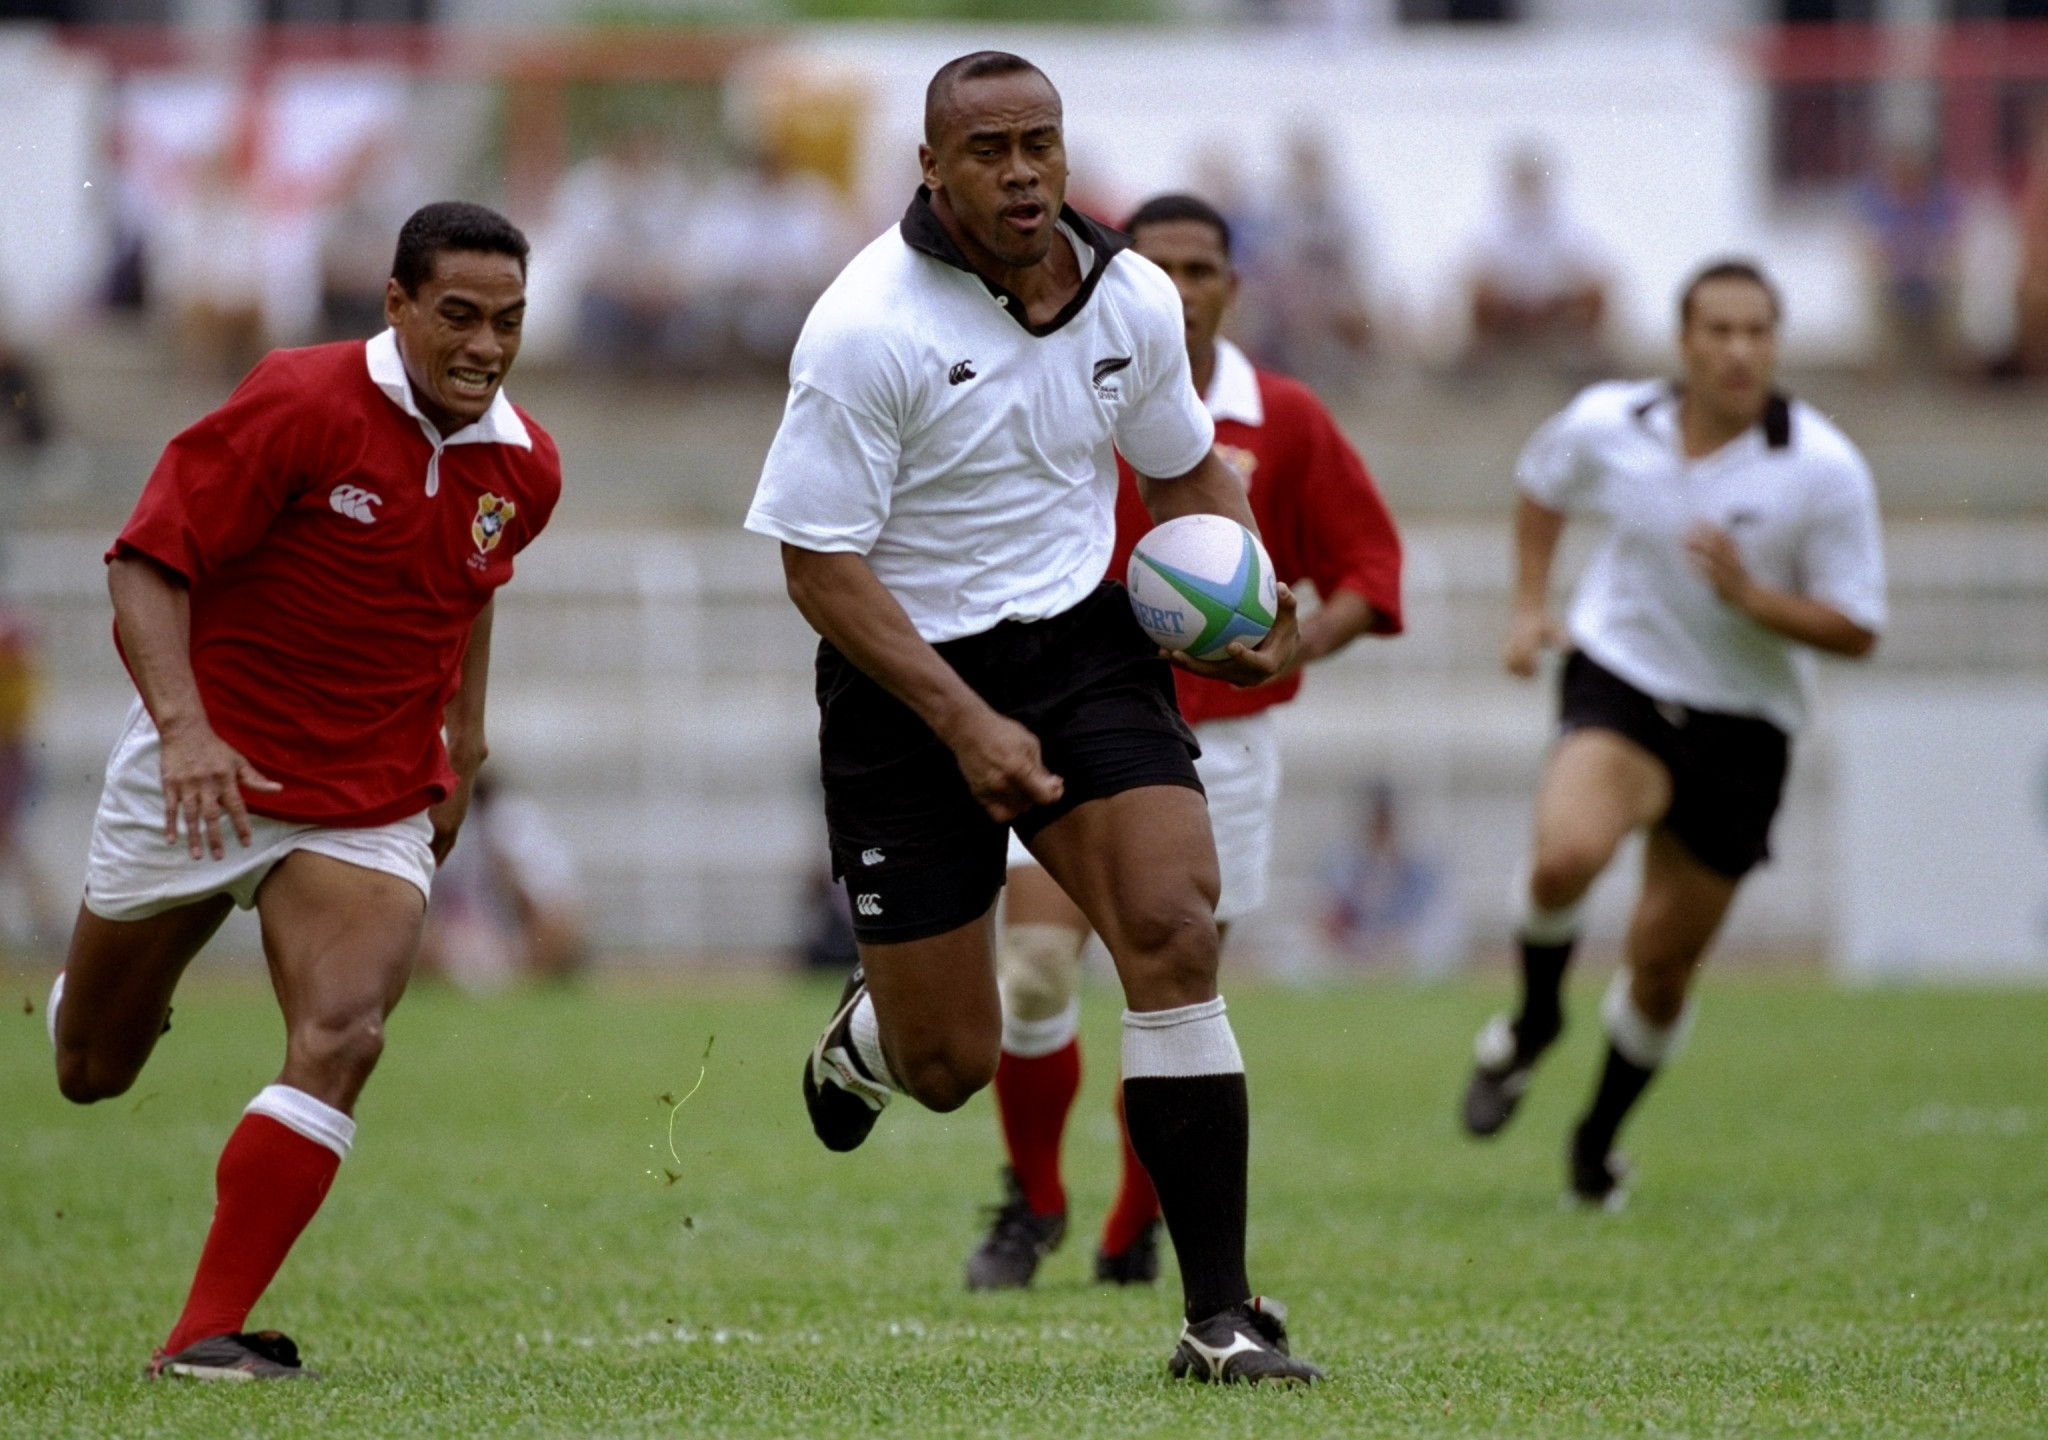 New Zealand legend Jonah Lomu was one of the stars of Kuala Lumpur 1998 where rugby sevens made its Commonwealth Games debut ©Getty Images